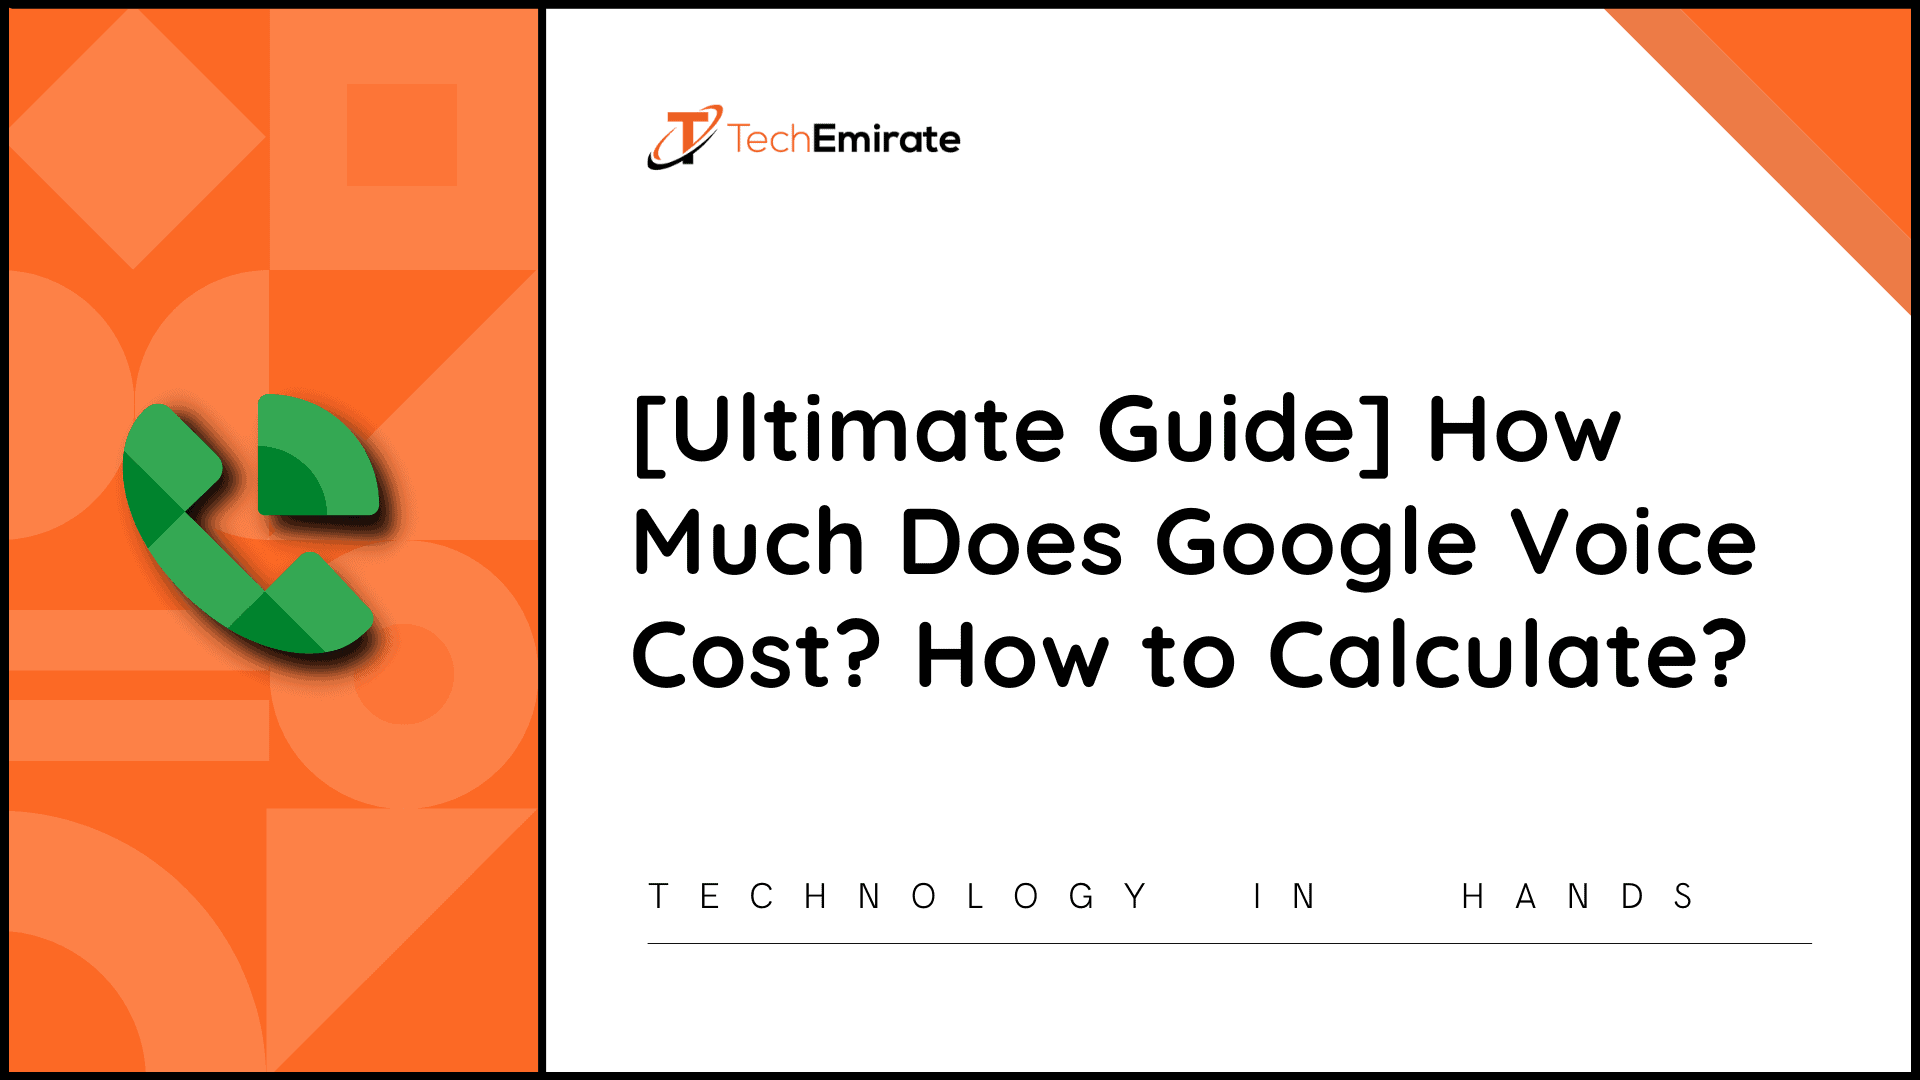 techemirate.com - how much does google voice cost